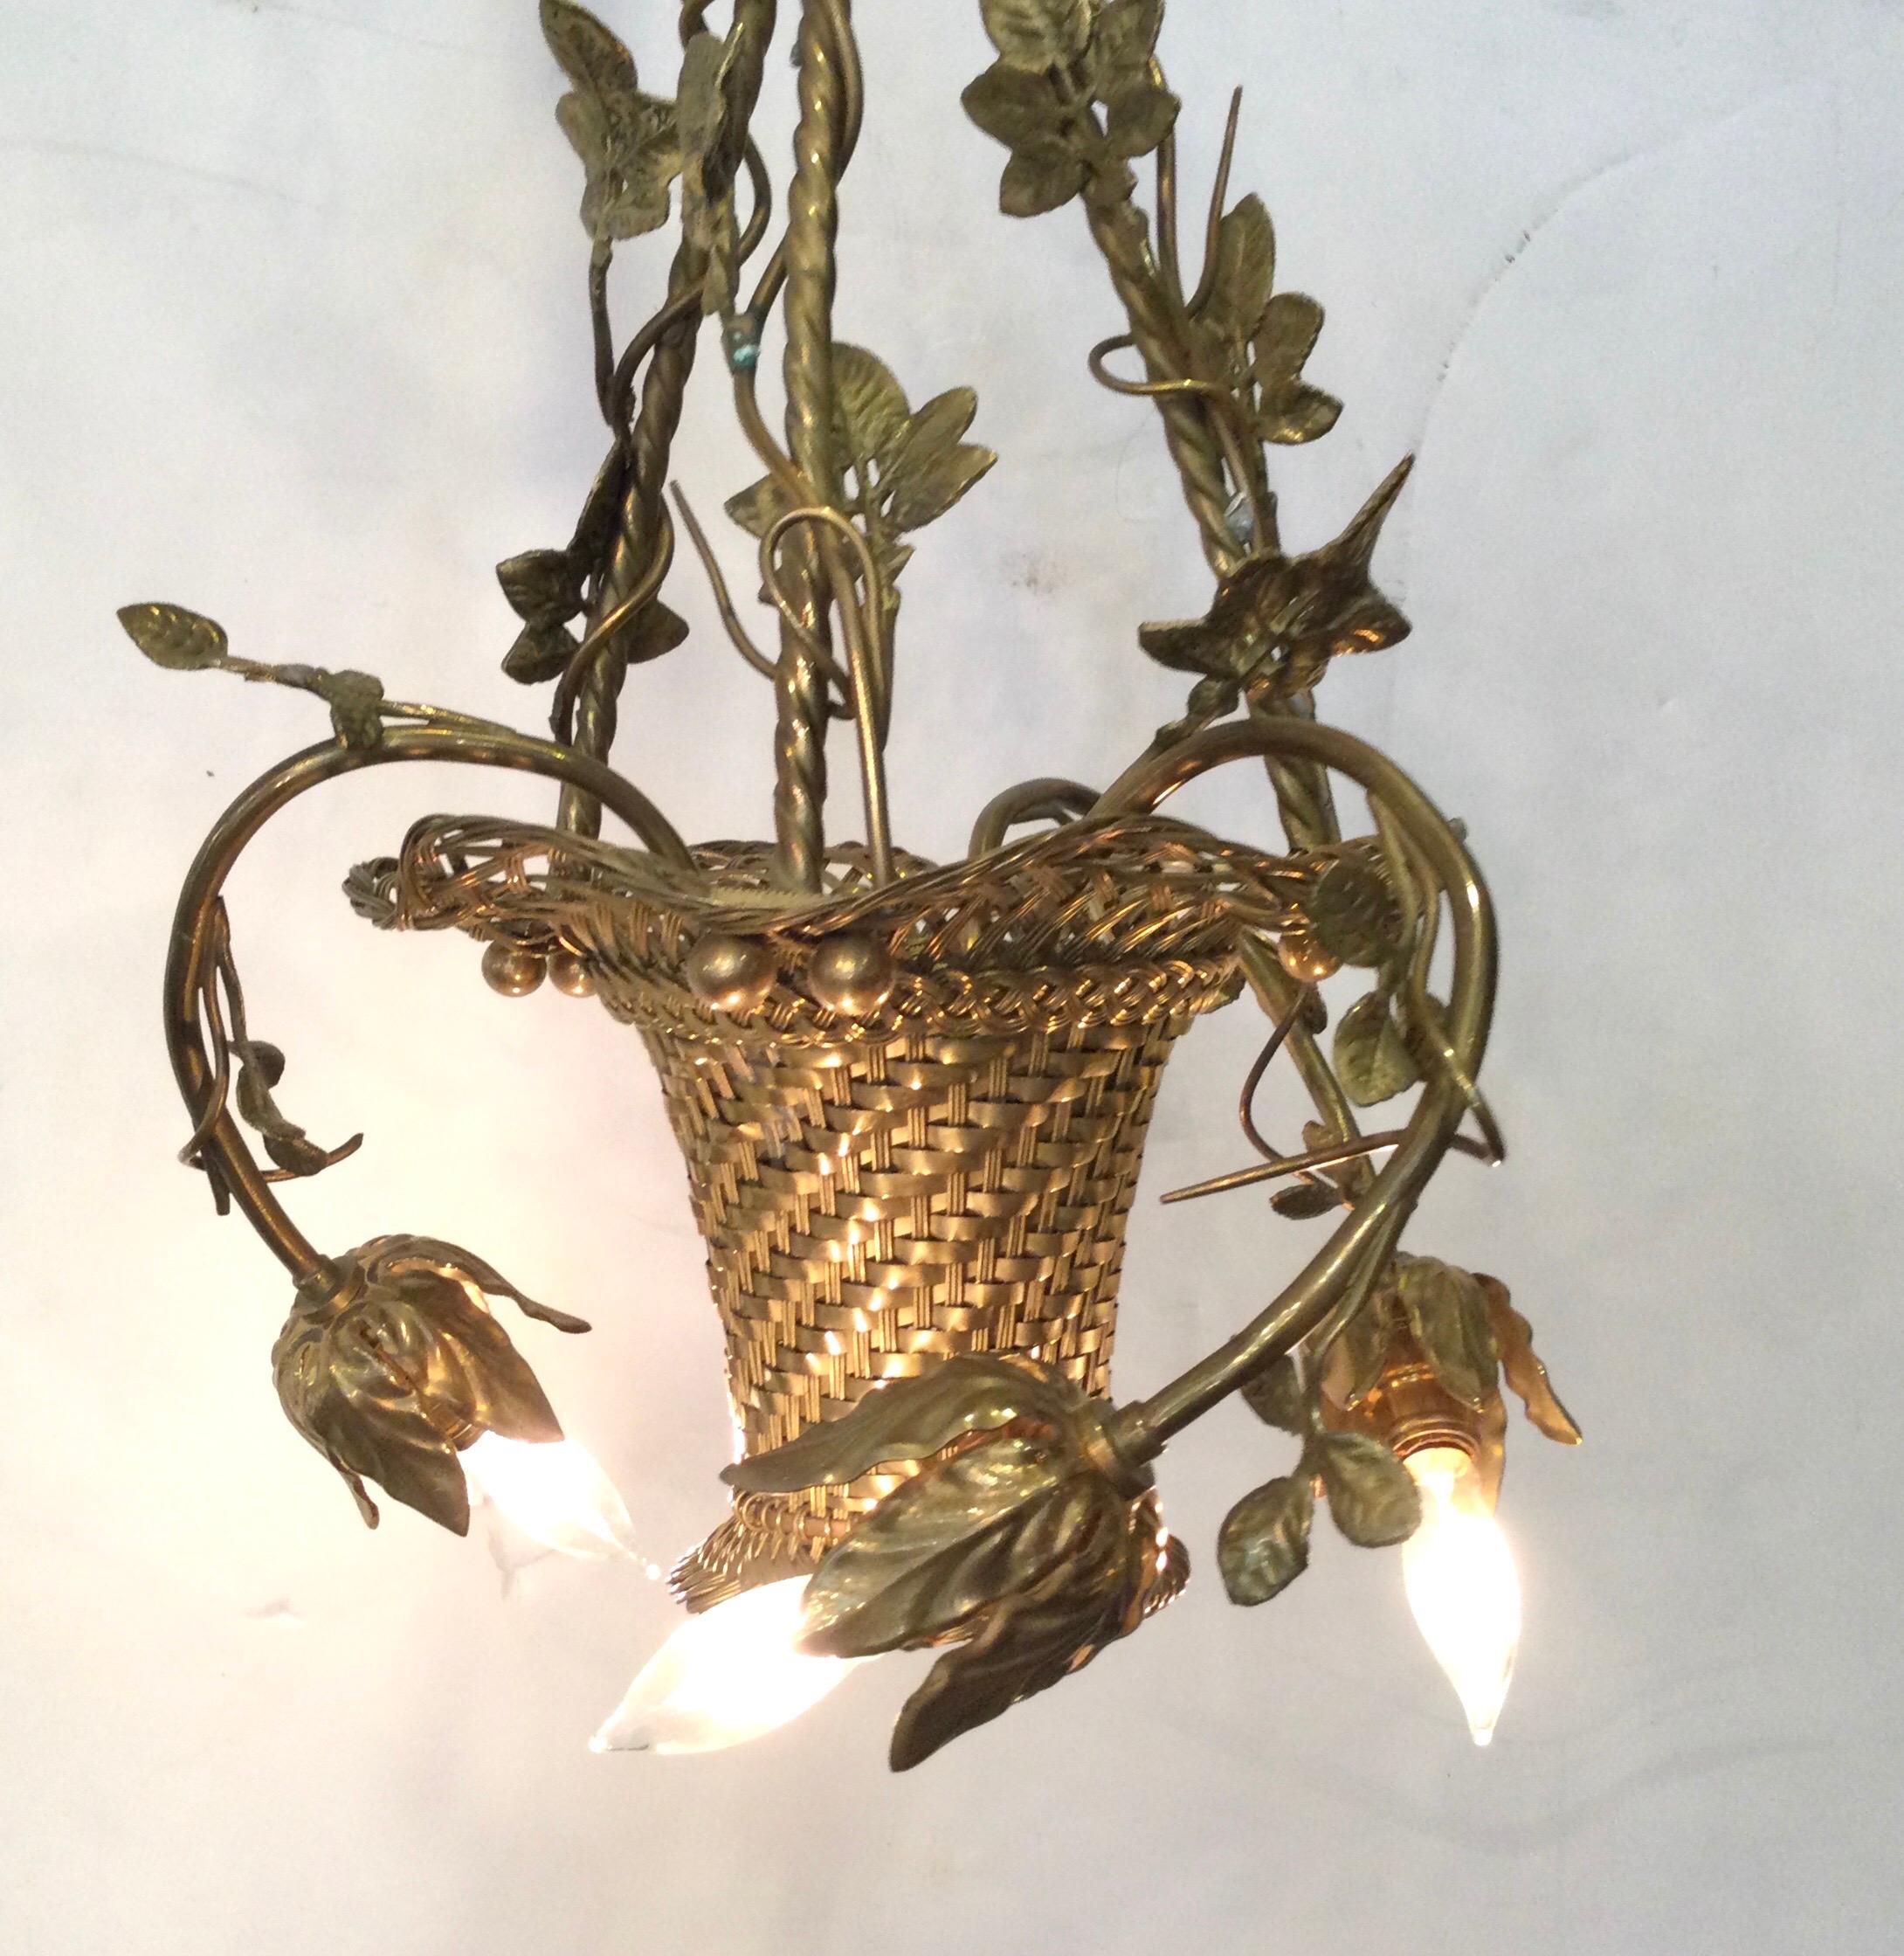 A Diminutive basket motif chandelier with three lights. The woven metal basket with thee shapely arms ending in a leafy socket for the bulb. The gilt finish is nicely aged and more dull subdued gold. Newly rewired. 39 inch drop.